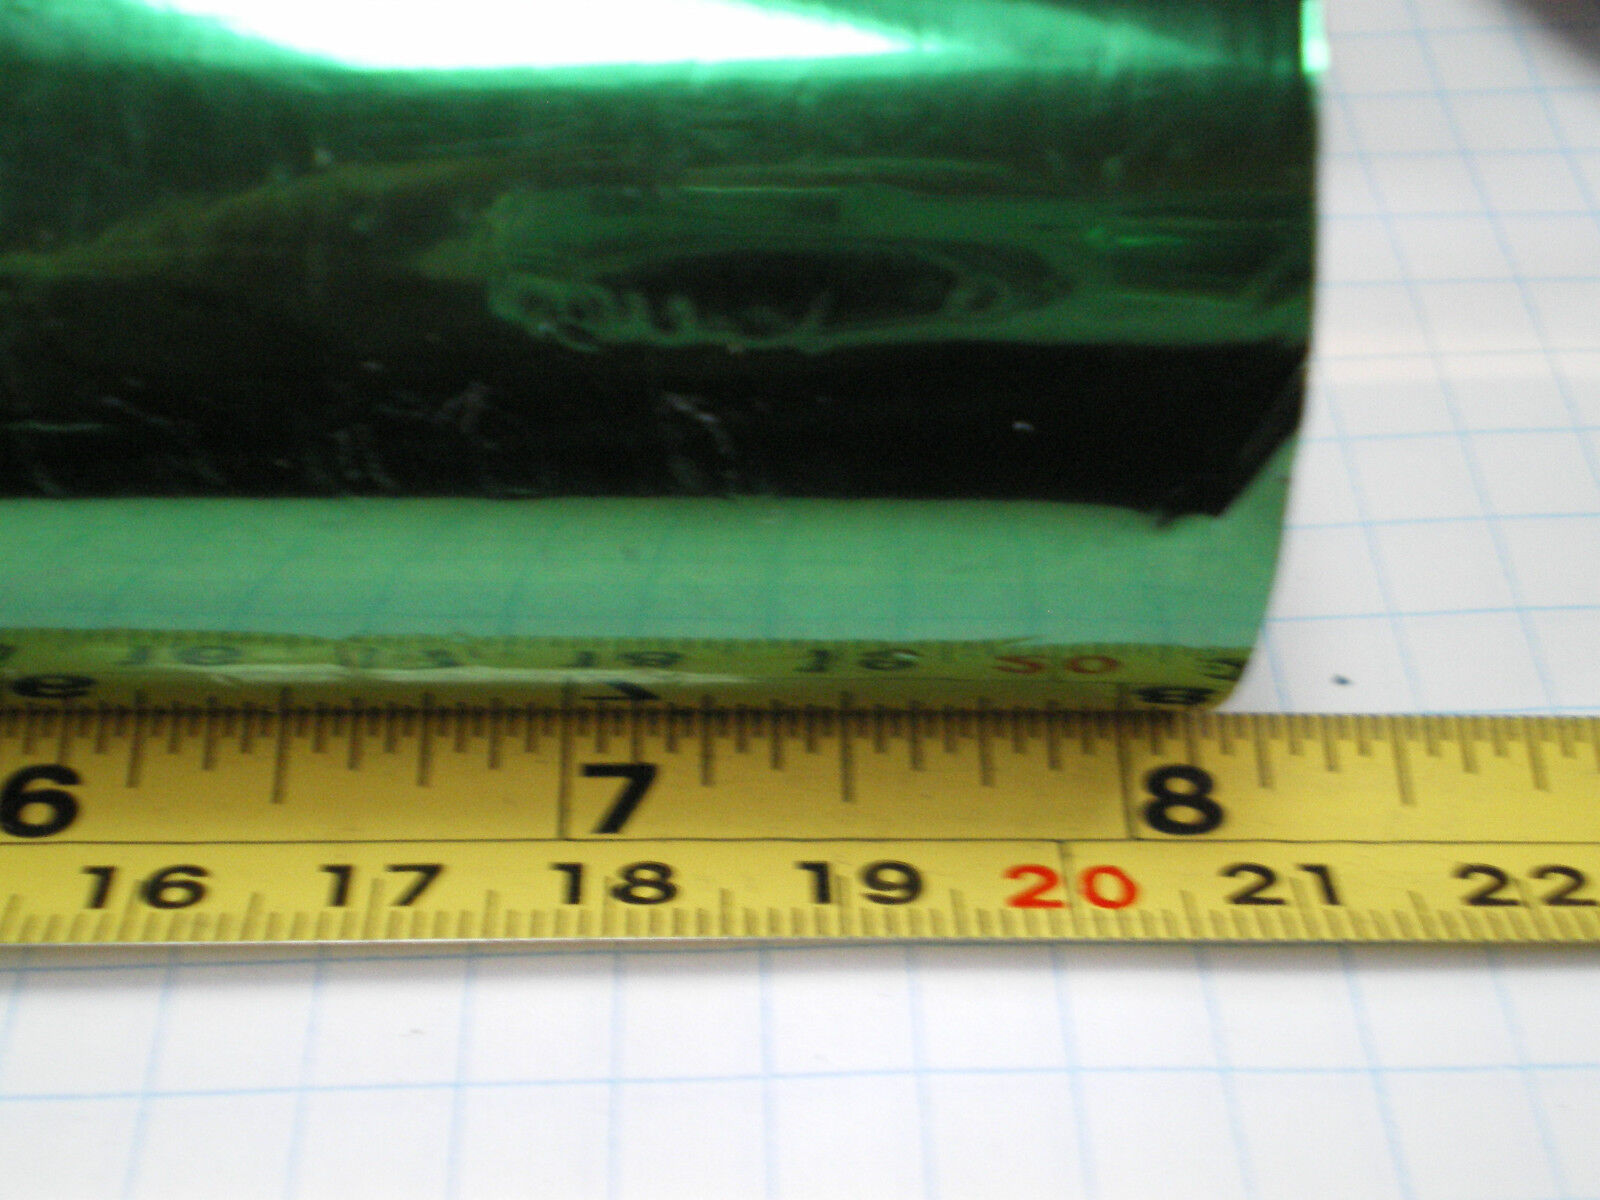 ITW EMERALD GREEN HOT STAMPING FOIL GC-727-885 200FT X 8 INCH ROLL  1/2 CORE